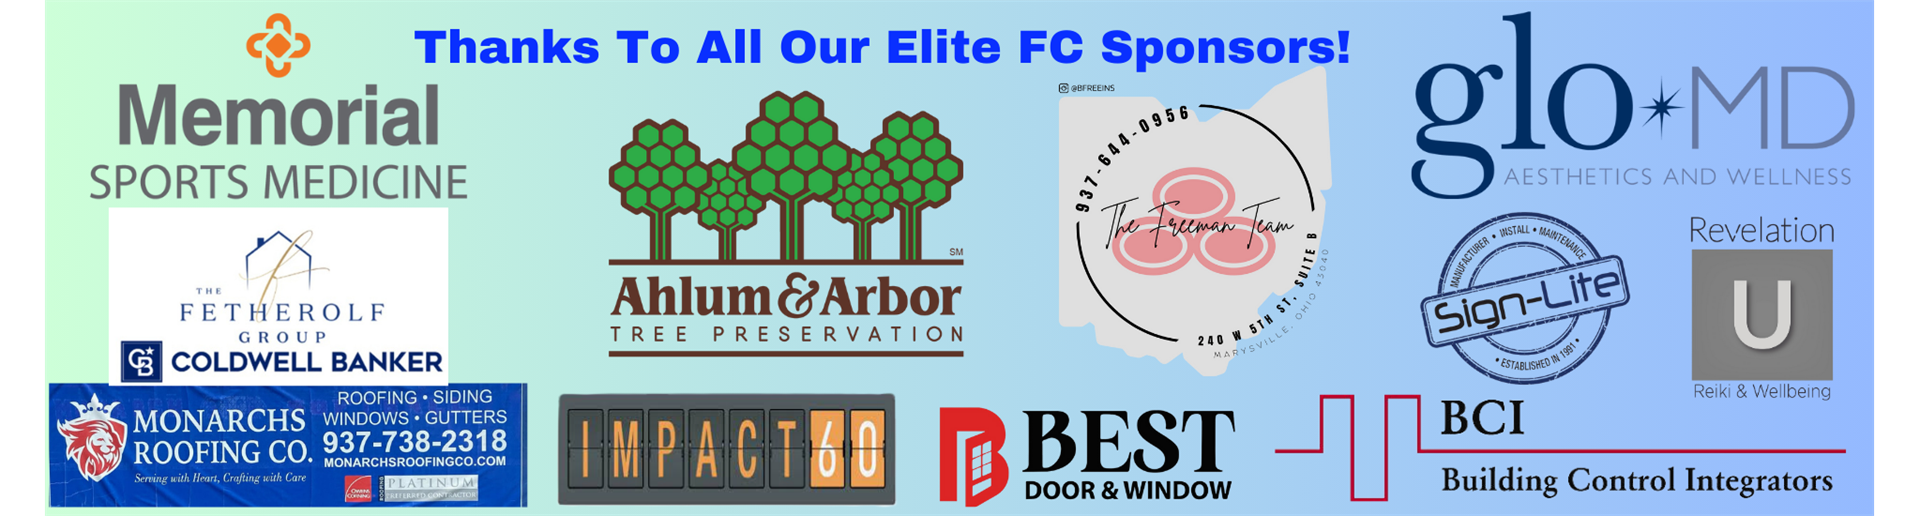 Thanks to all the Elite FC Sponsors!